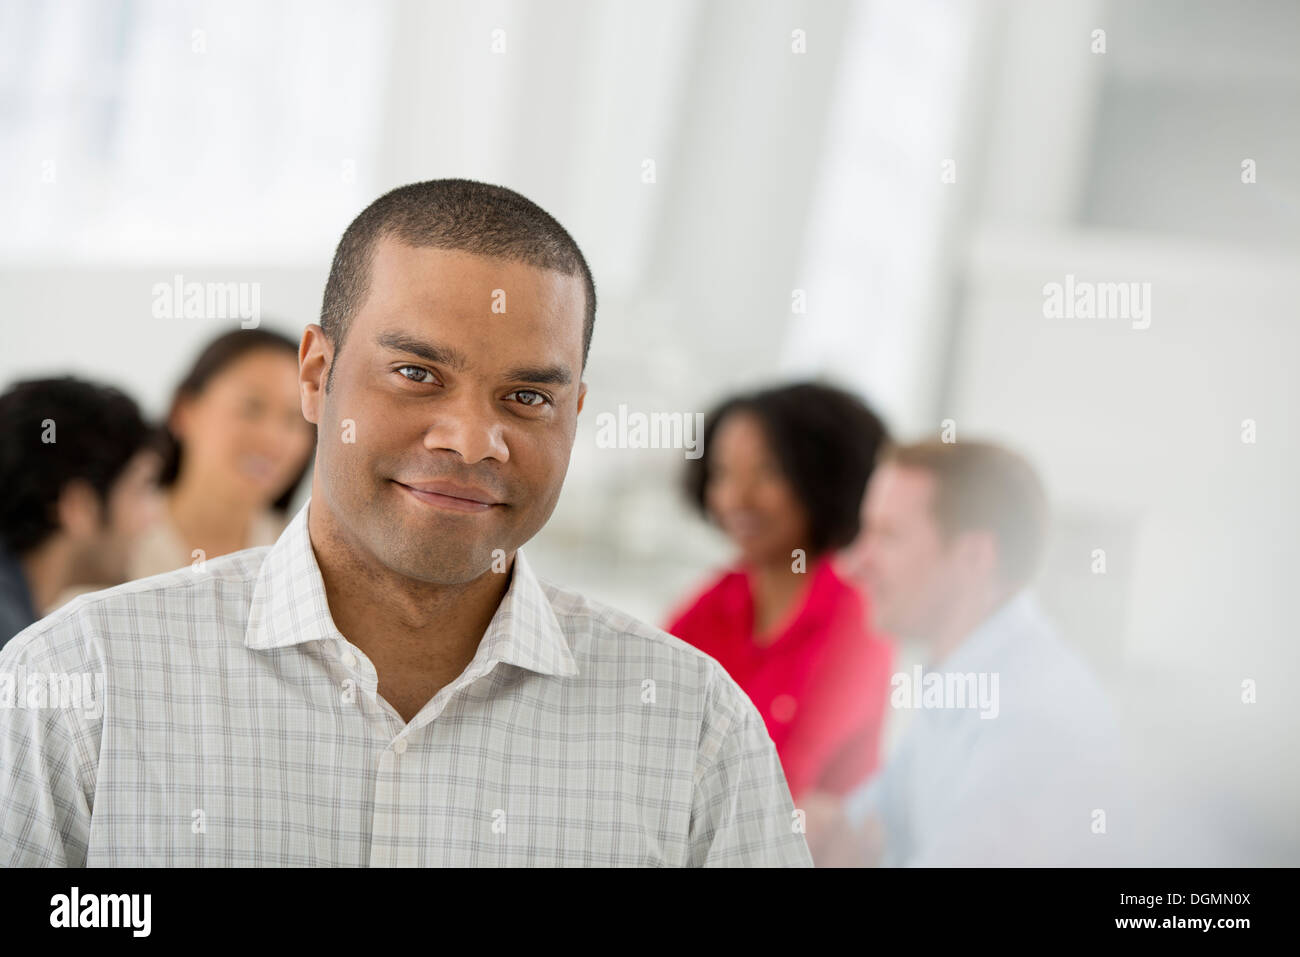 Business meeting. A man smiling confidently. Stock Photo